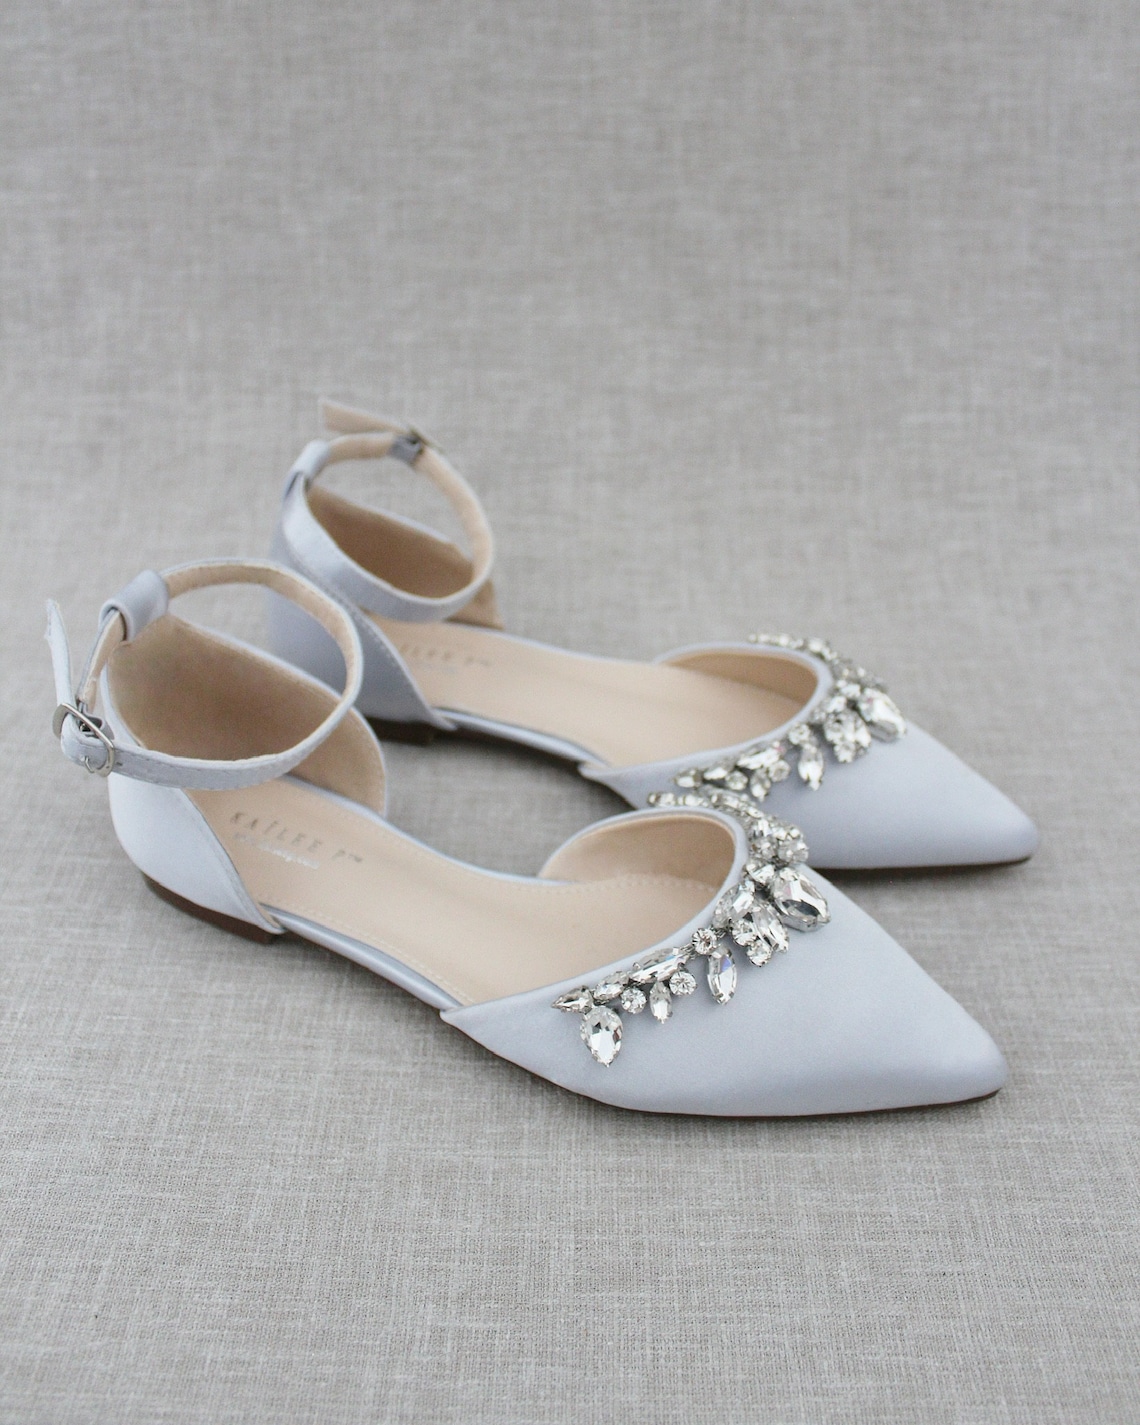 Silver Satin Pointy Toe Flats with Sparkly TEARDROP ANKLE STRAP